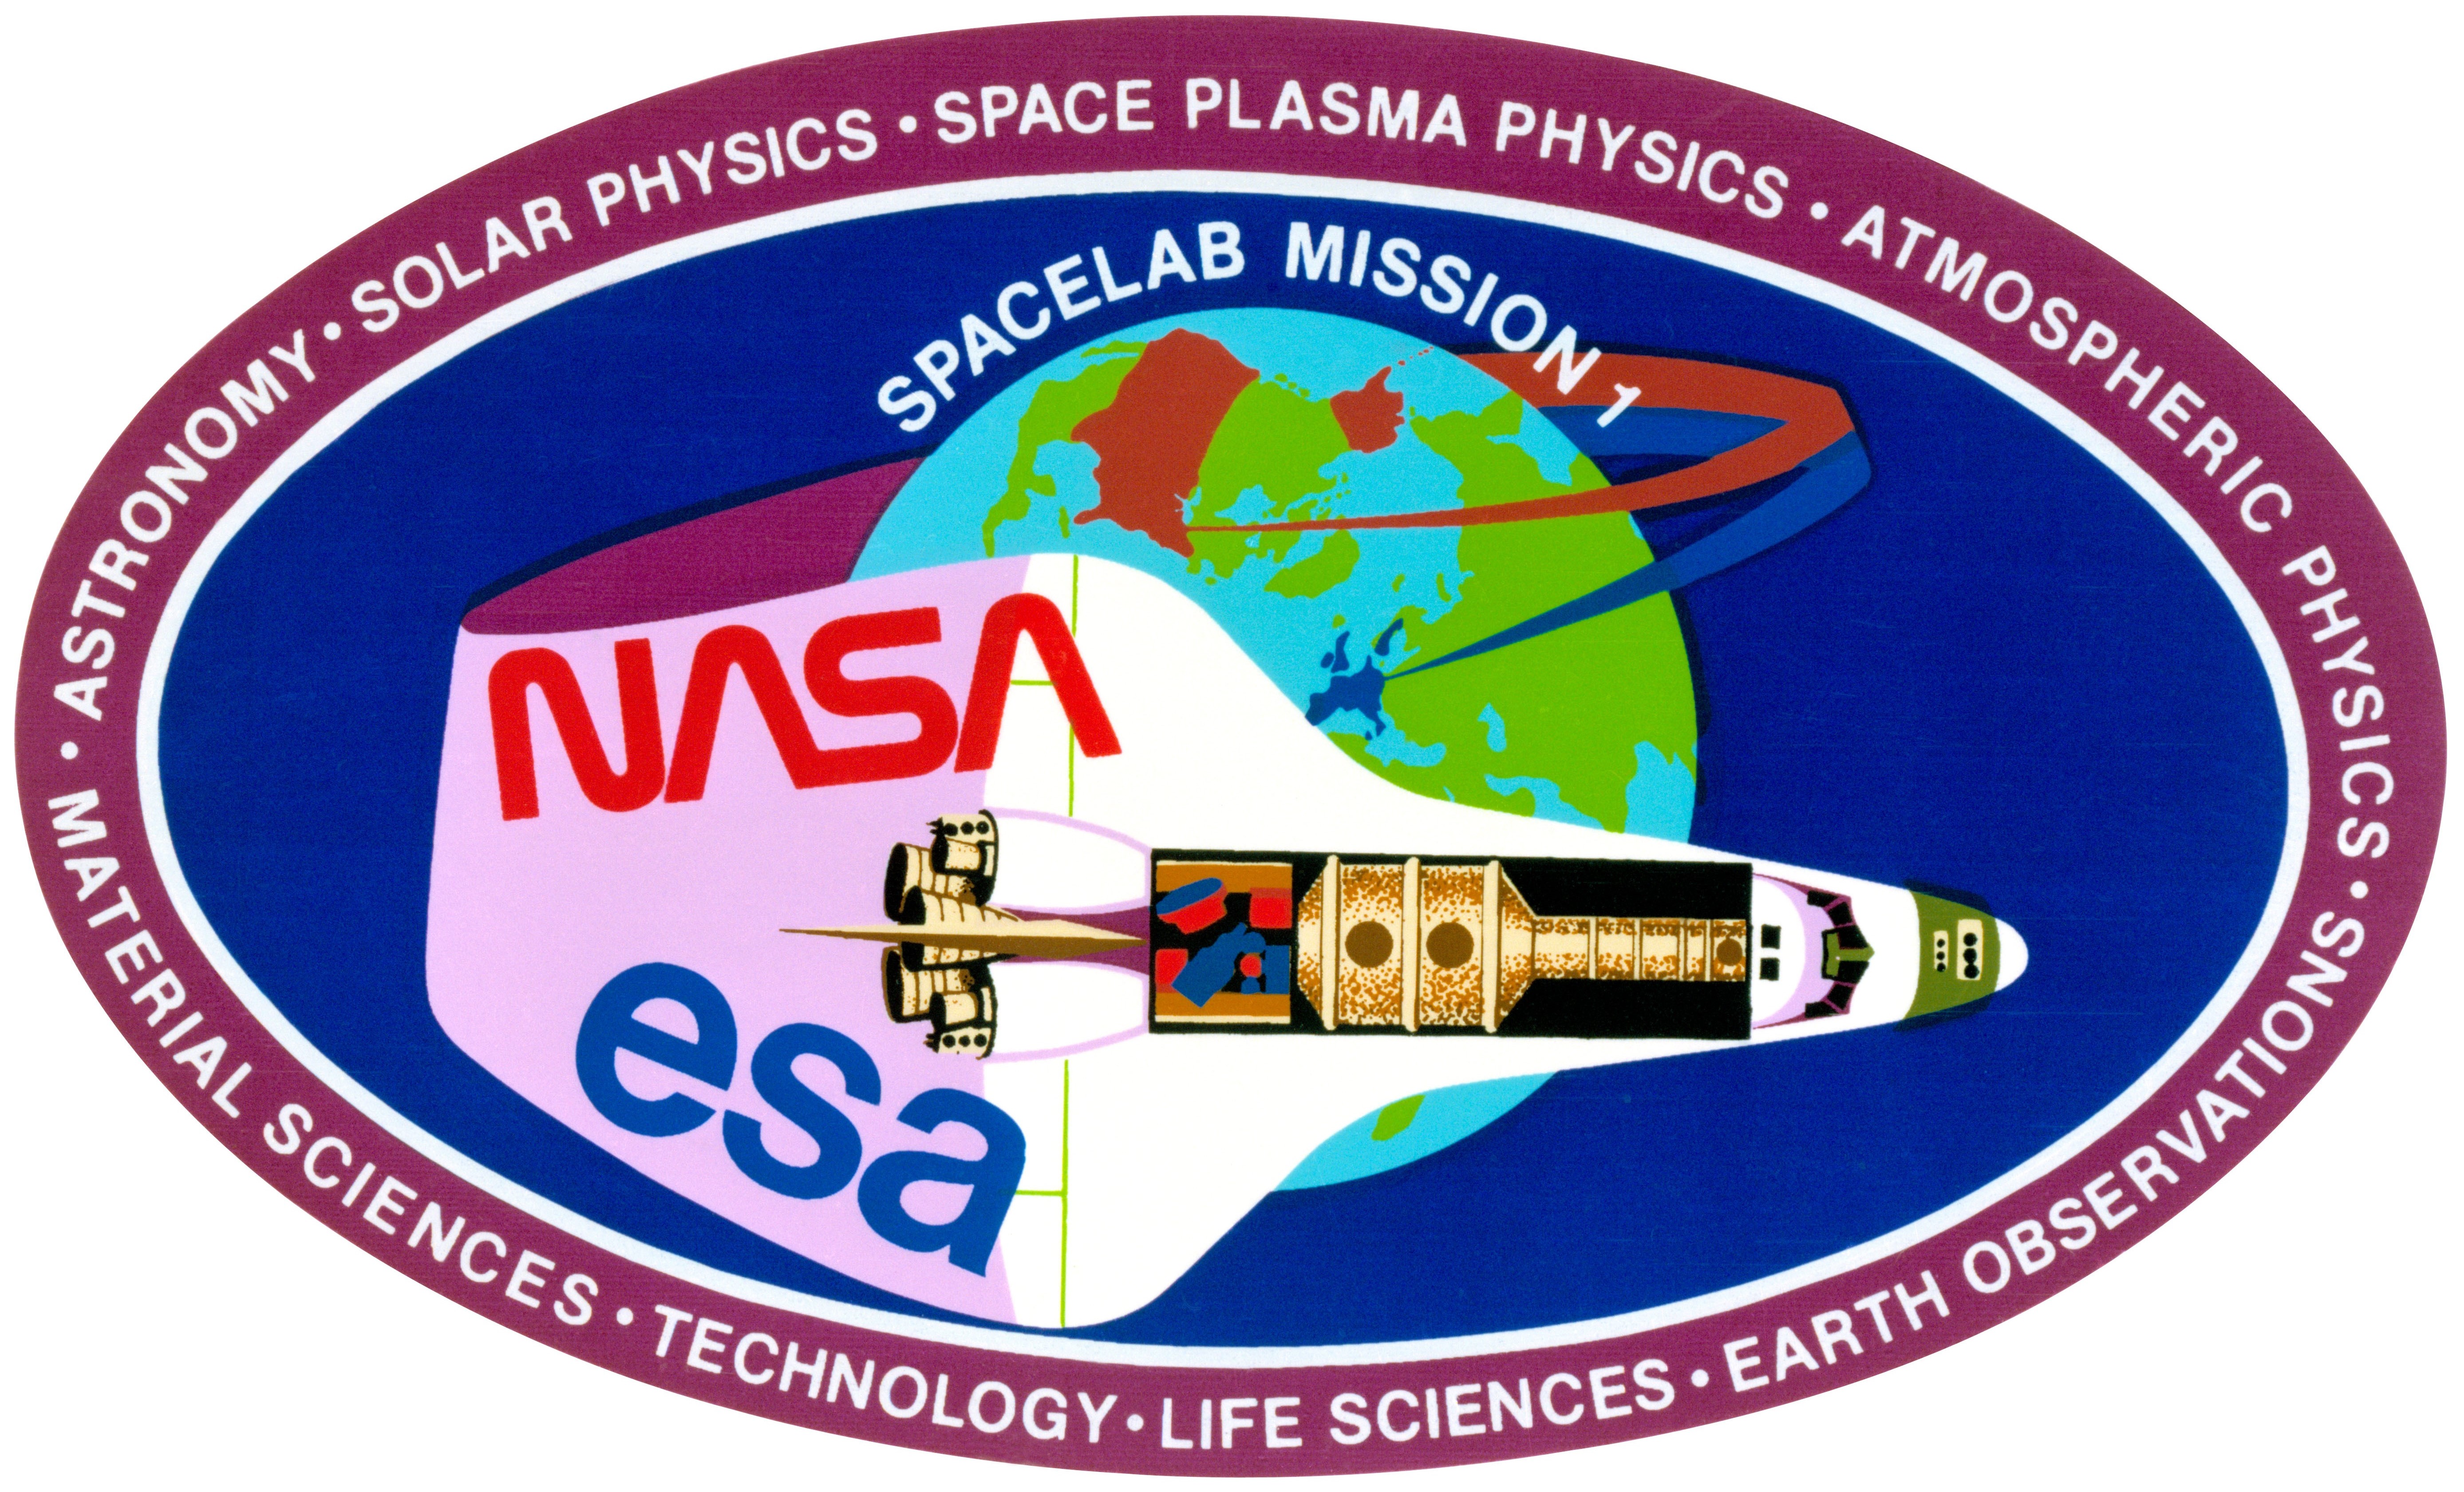 The payload patch for Spacelab 1